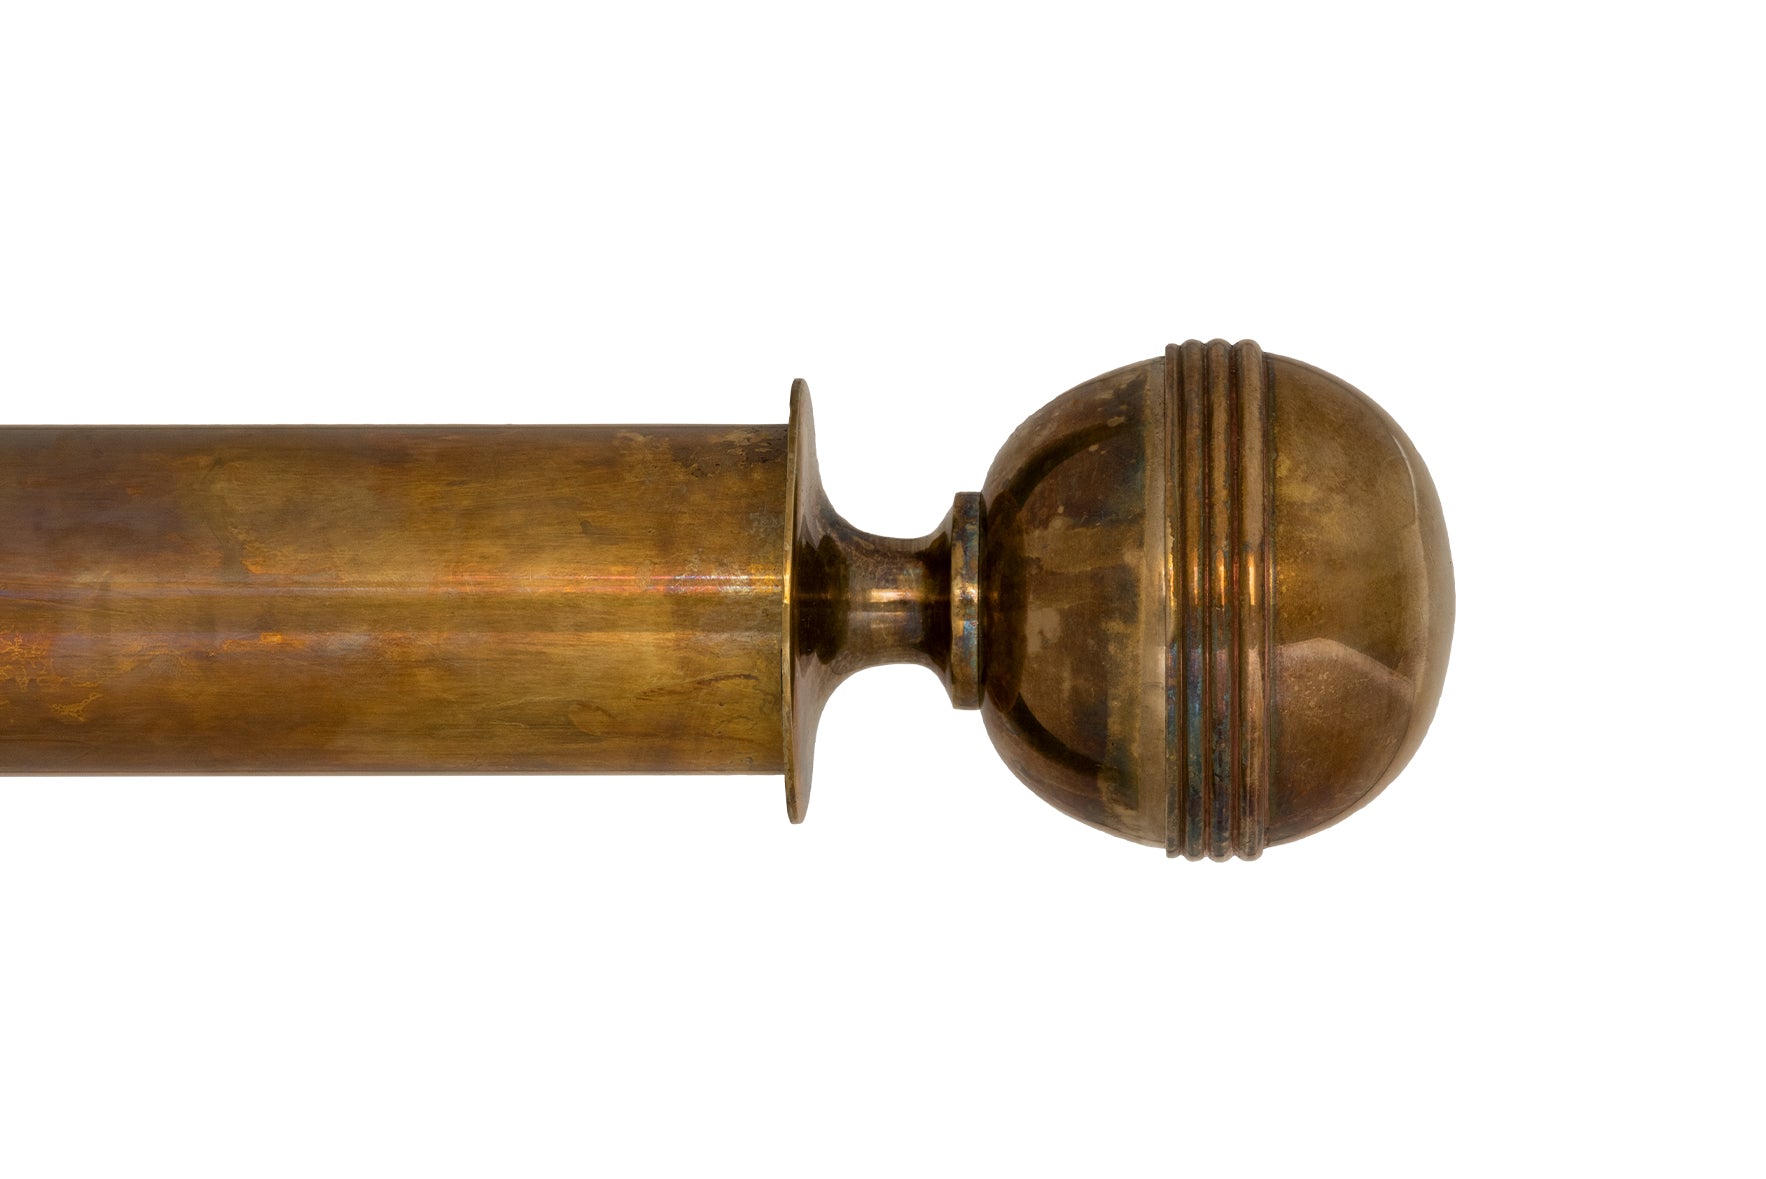 Tillys Classic Four Rib Ball Finial Curtain Pole Set in Old Brass